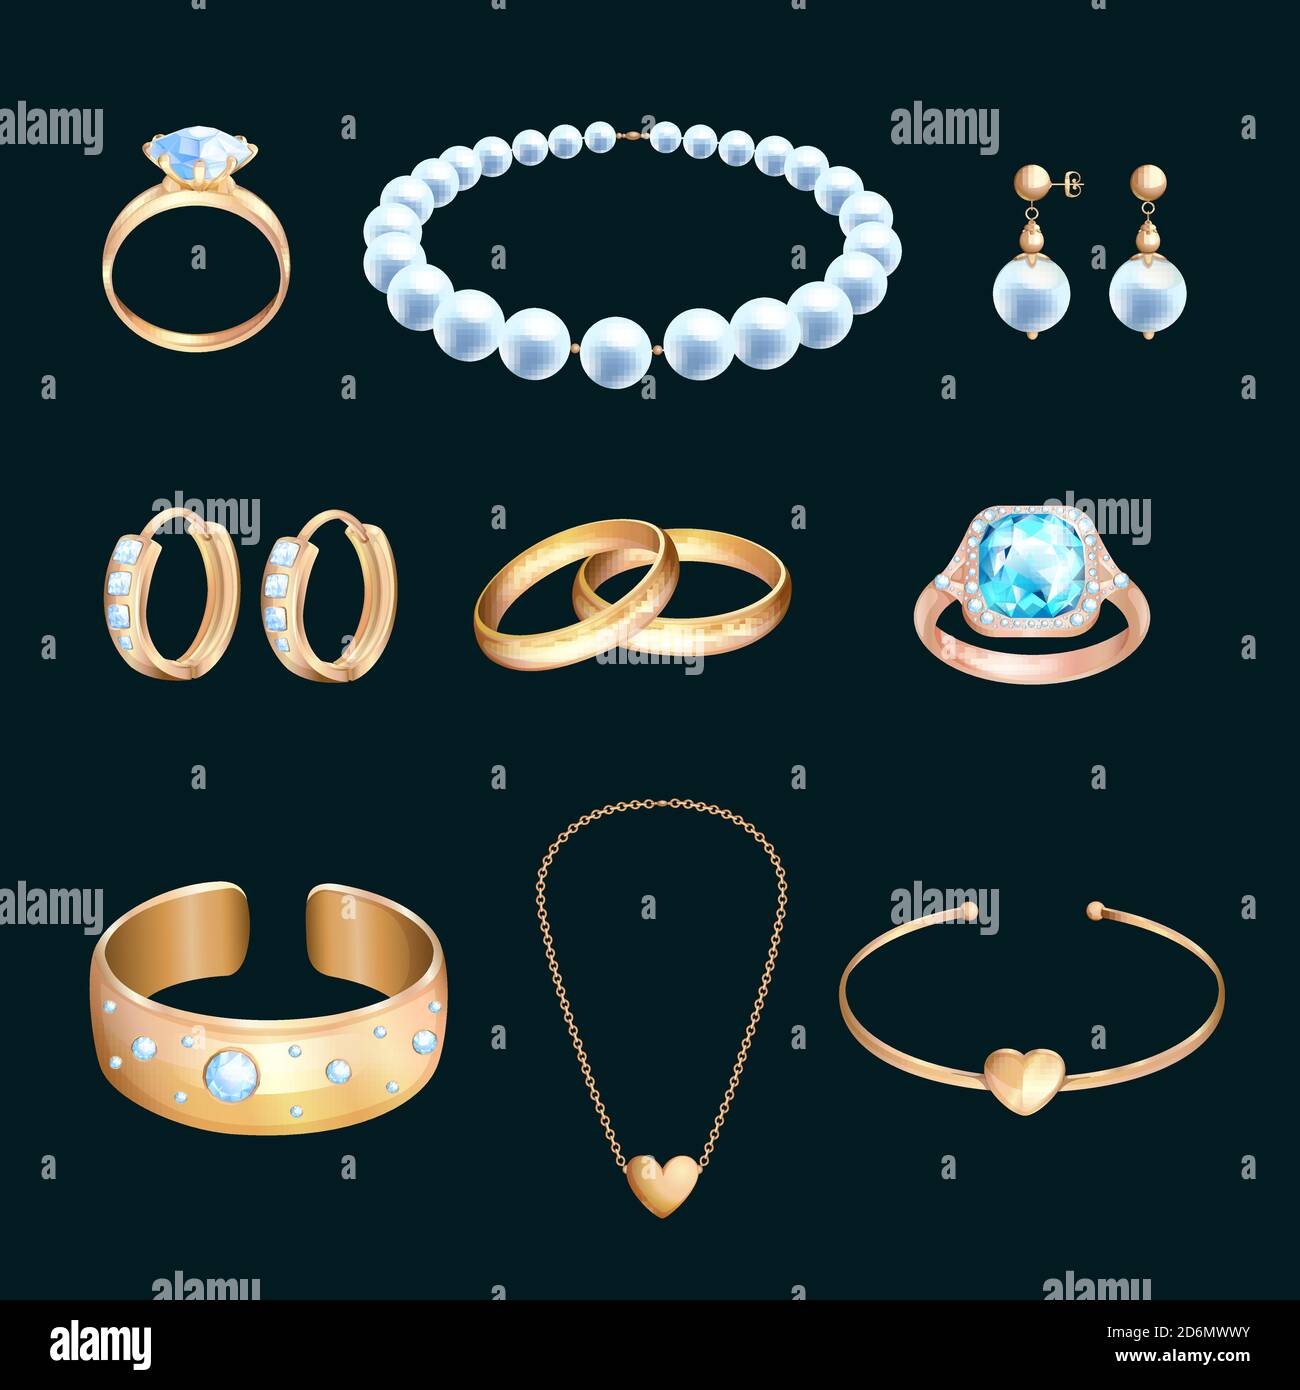 Golden jewelry and gems, vector cartoon illustration. Set of pearl necklace, earrings and wedding rings. Luxury gifts design elements. Stock Vector